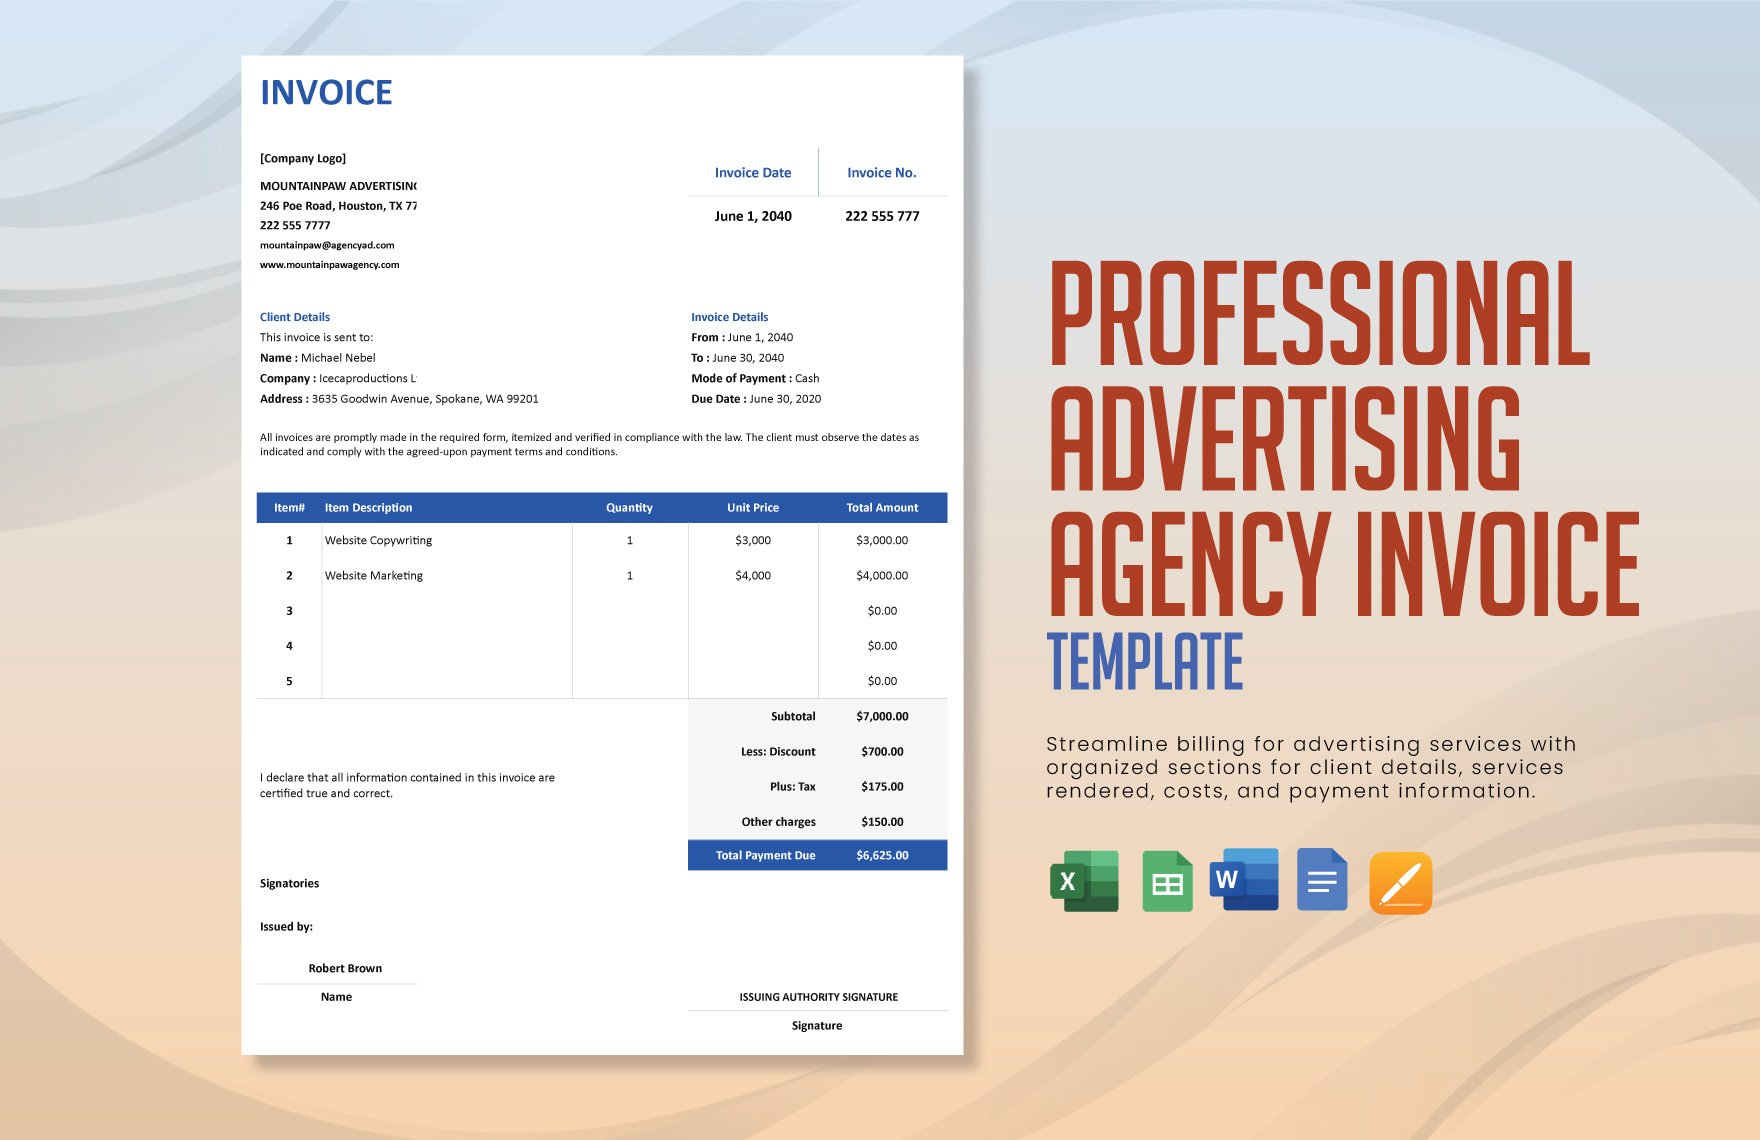 Professional Advertising Agency Invoice Template in Word, Google Docs, Excel, Google Sheets, Apple Pages